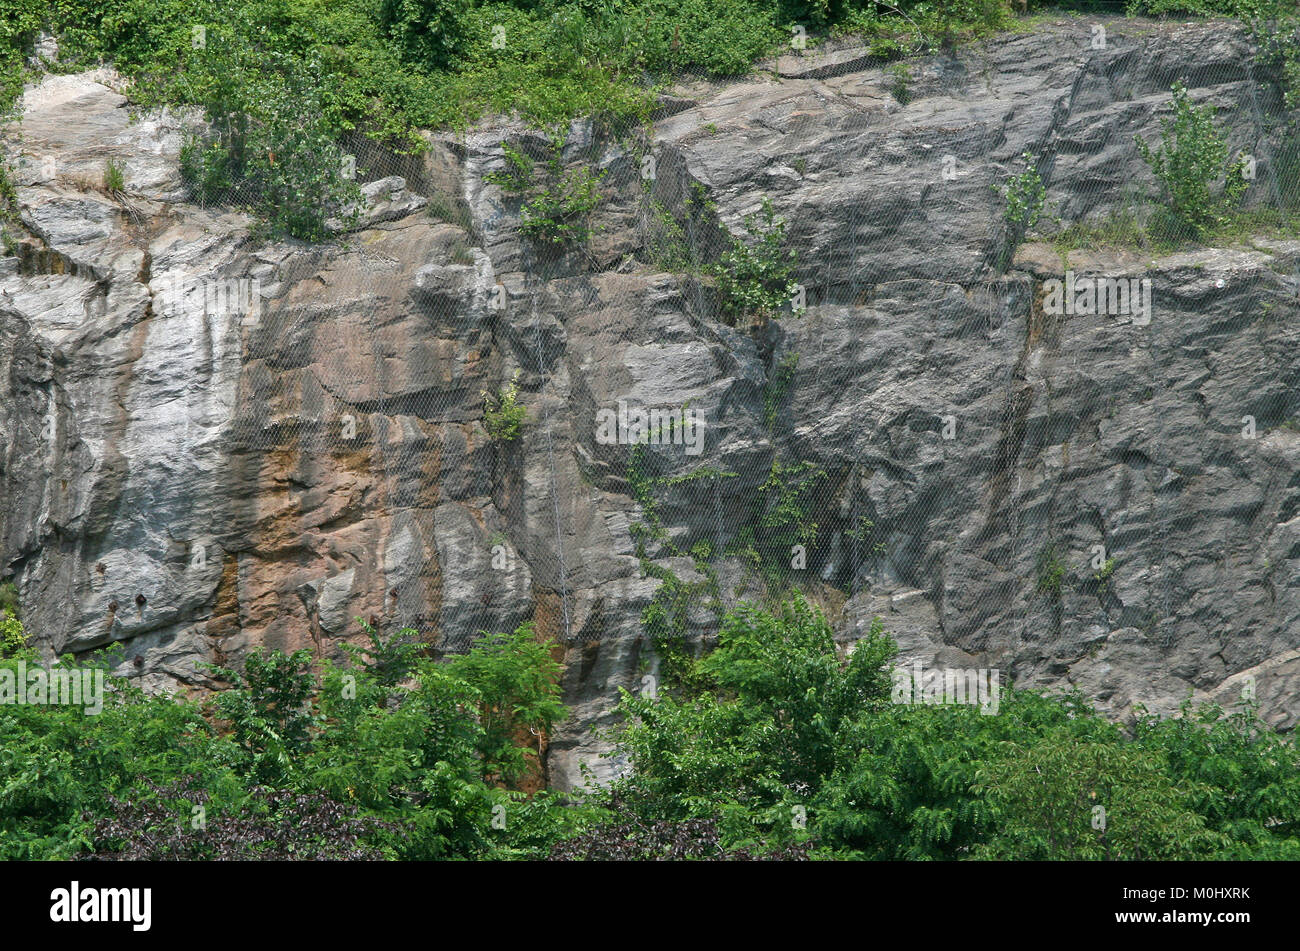 Rock slope covered with mesh surrounded by plants and bushes along the Harlem River, Harlem, Upper Manhattan, New York City, New York State, USA. Stock Photo